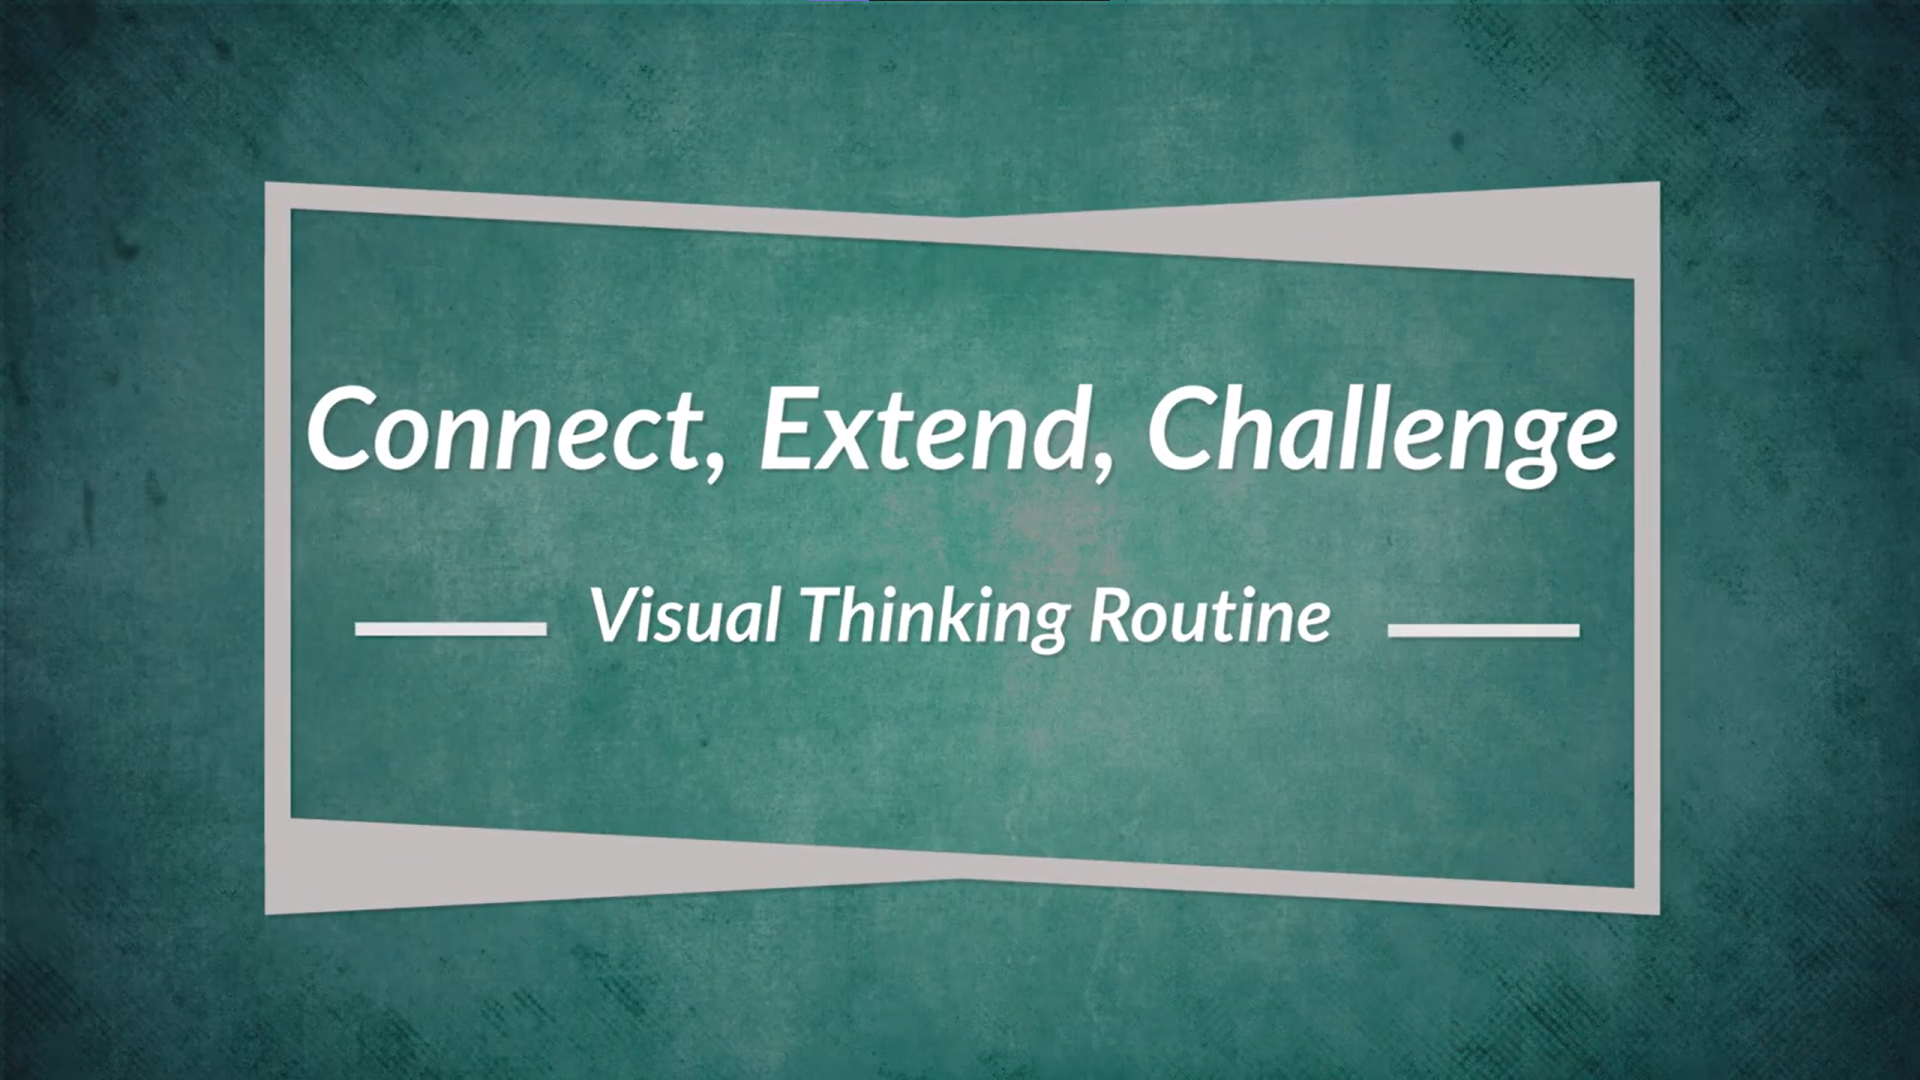 Cover image for the "Connect, Extend, Challenge" Visual Thinking Strategy